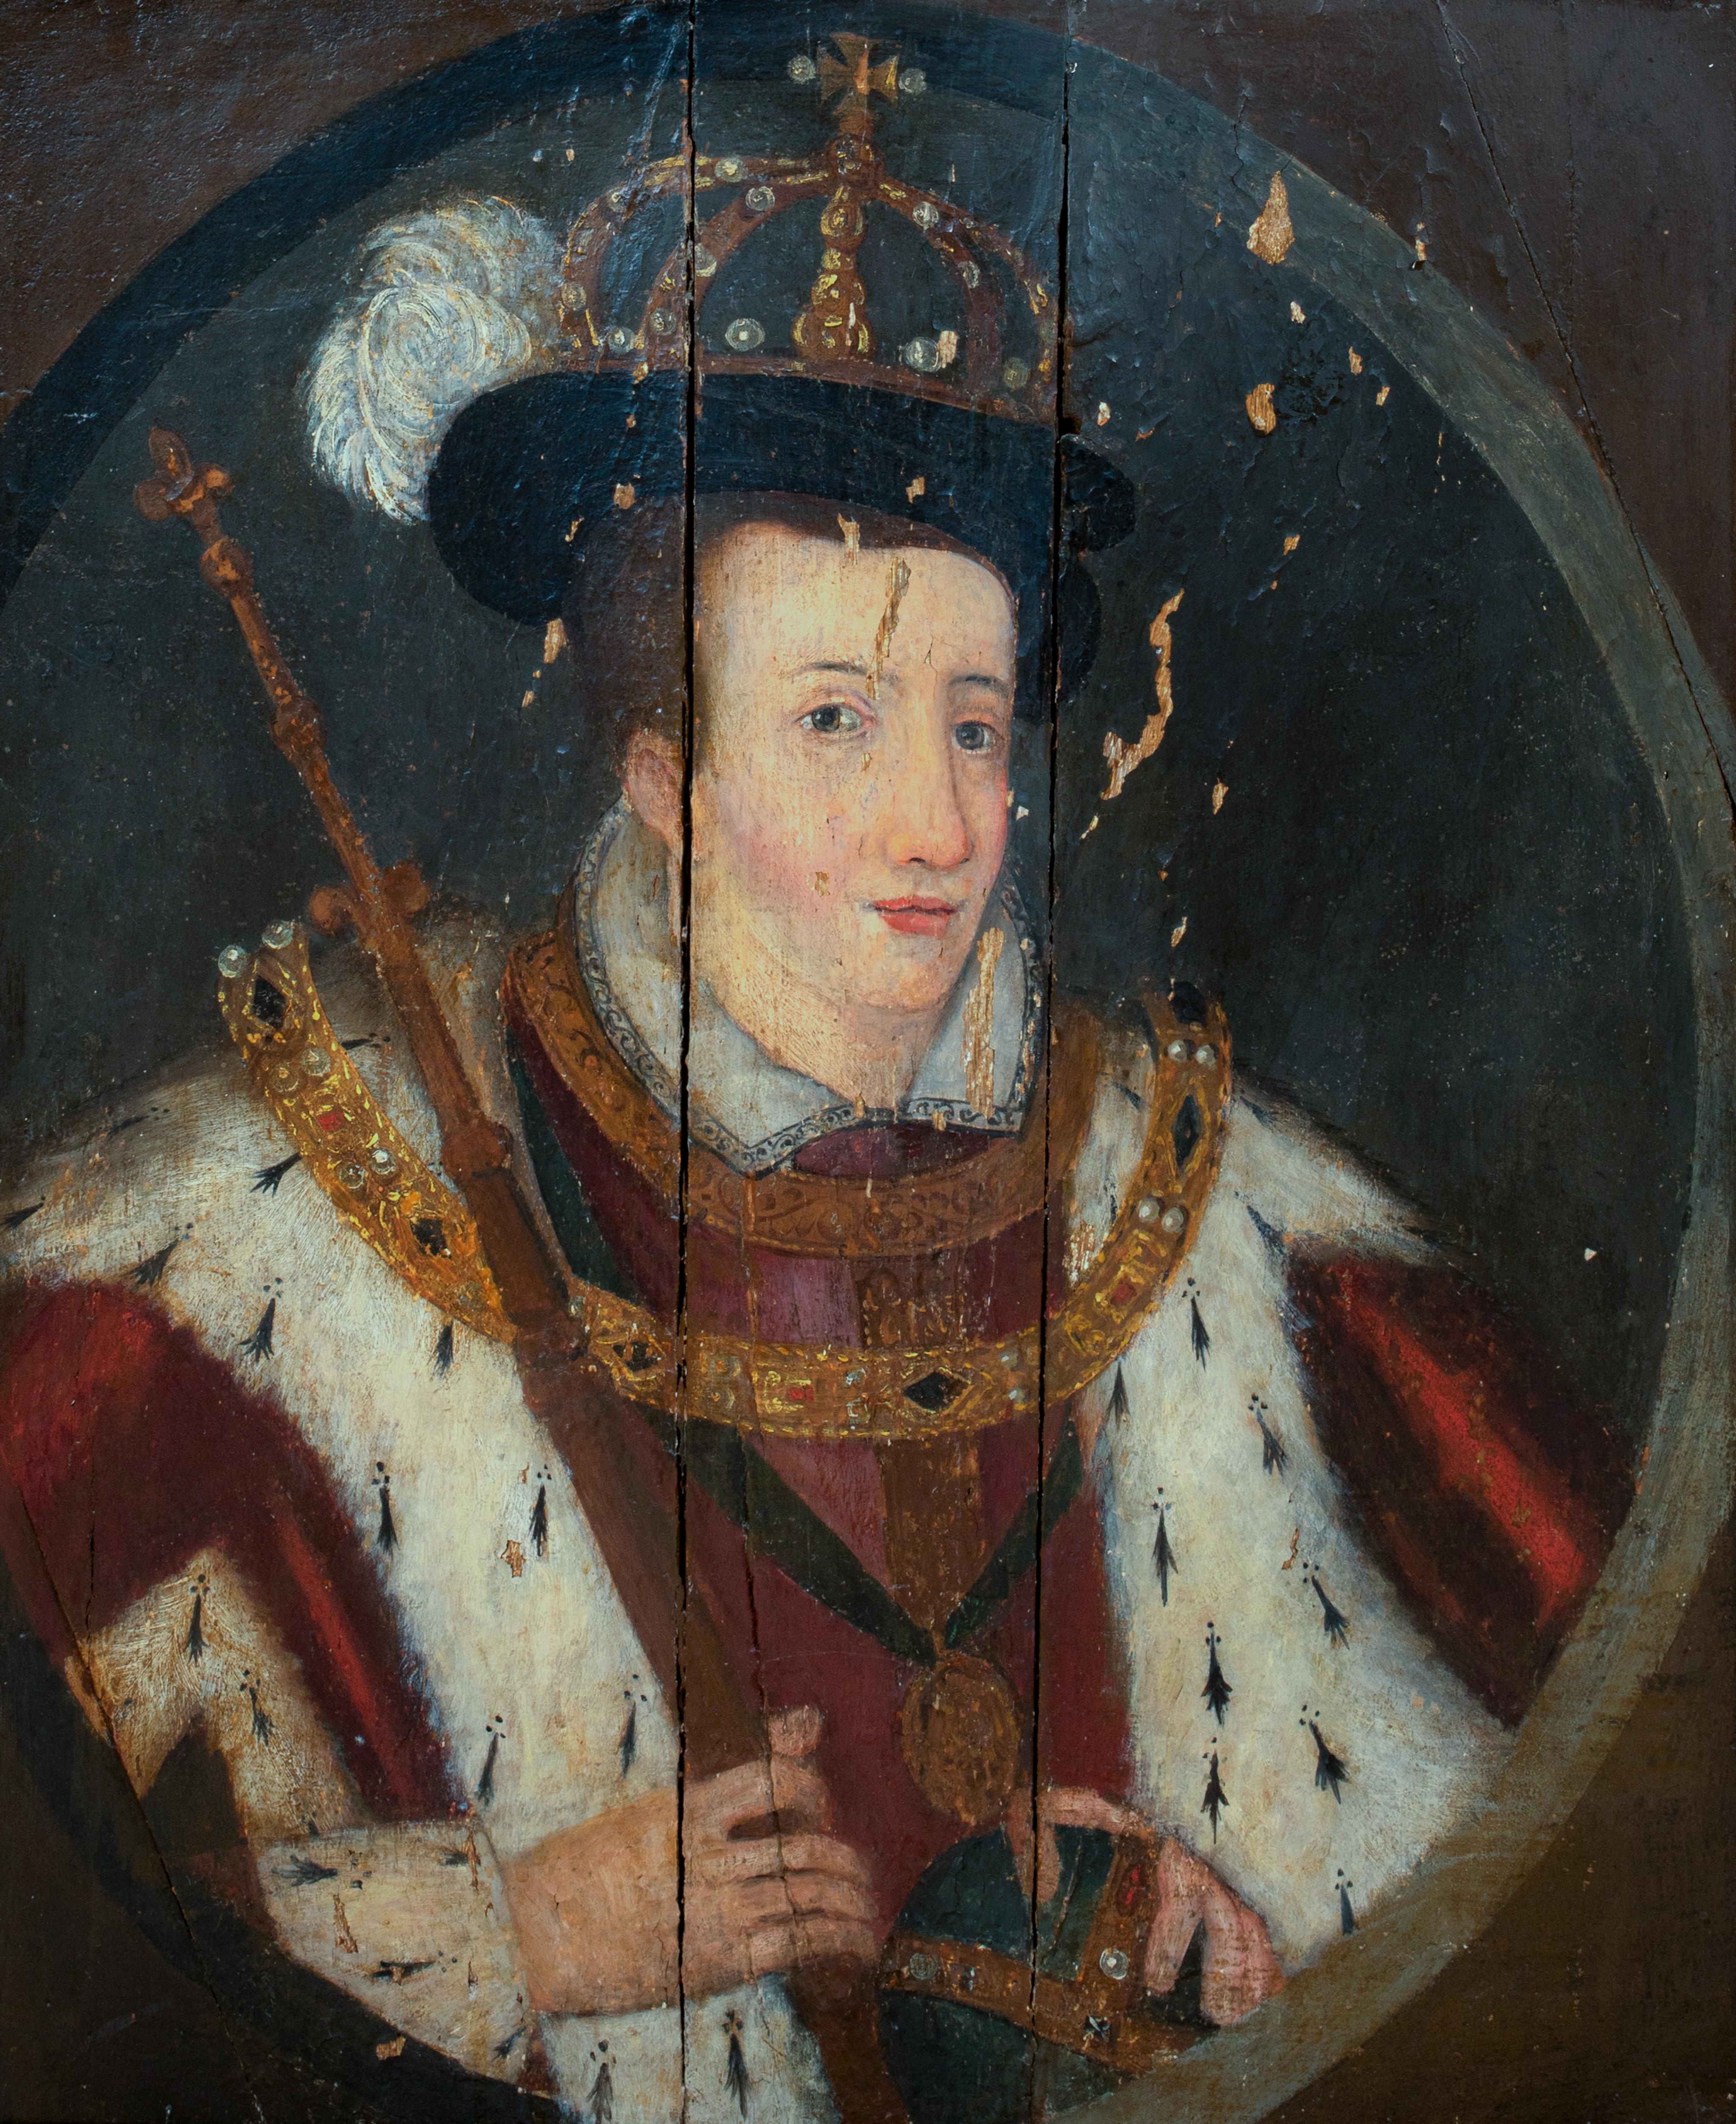 Coronation Portrait Of King Edward VI (1537-1553) as King Of England & Ireland, 16th Century 

English School - Oil on panel - circa 1547

Large 16th Century Coronation portrait of Edward VI as King Of England & Ireland, oil on panel. Early and